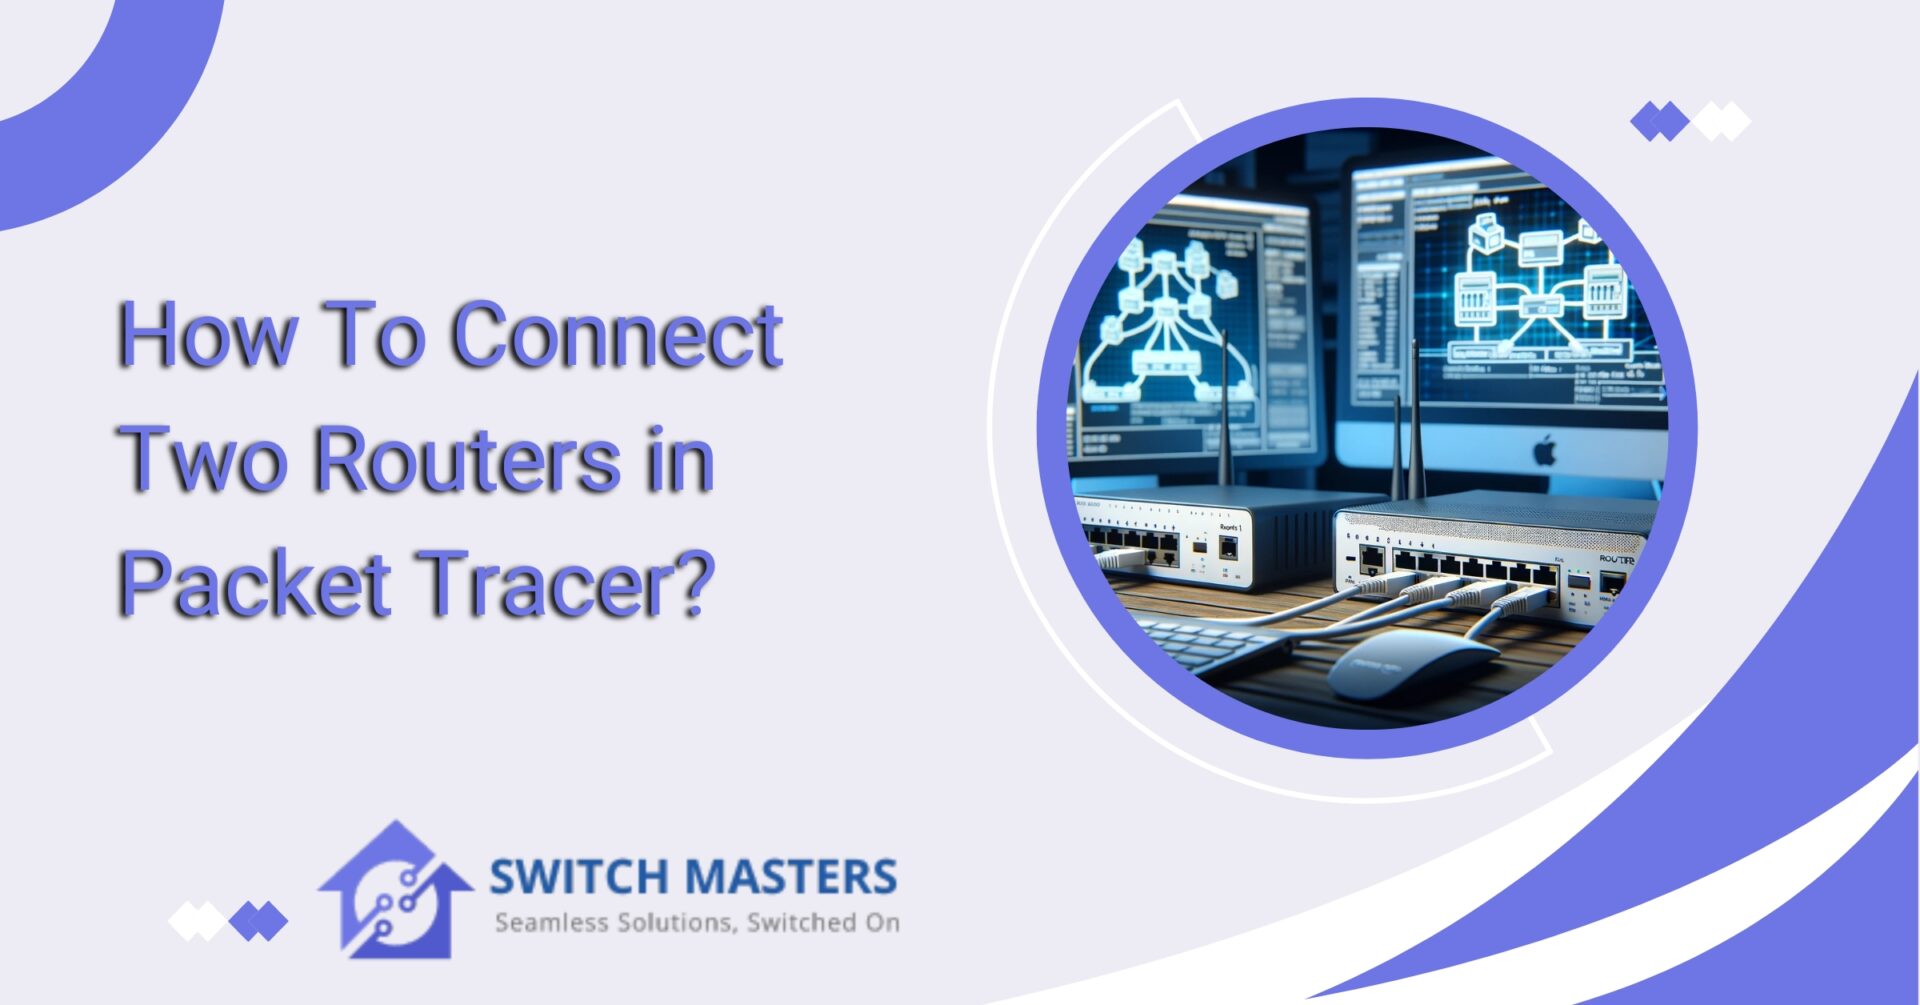 How To Connect Two Routers in Packet Tracer